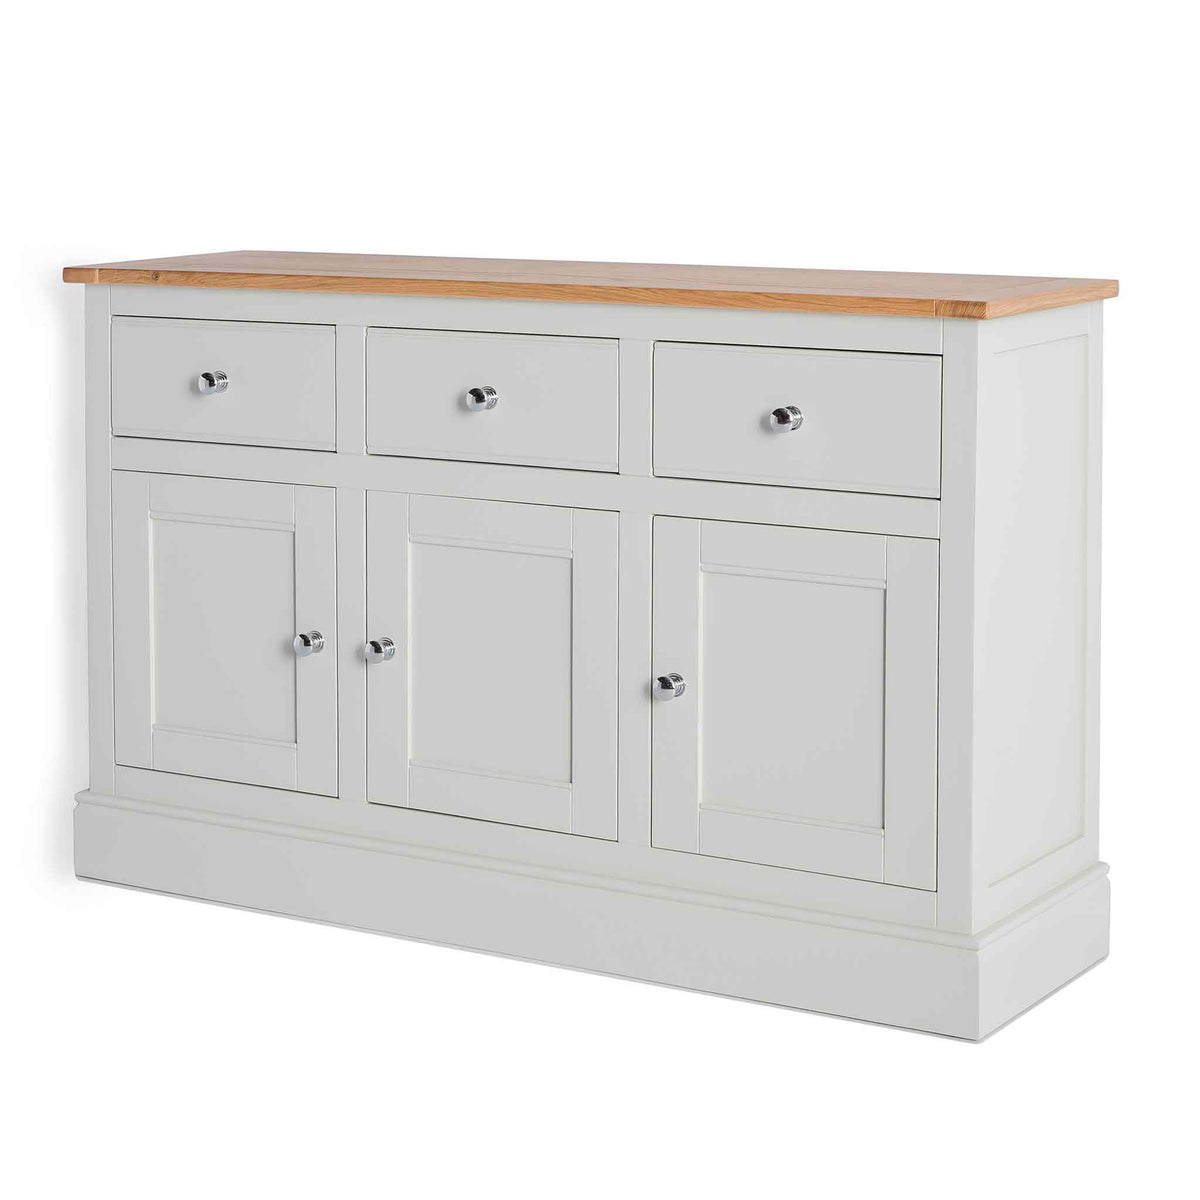 Chichester Ivory Large Sideboard - Side view